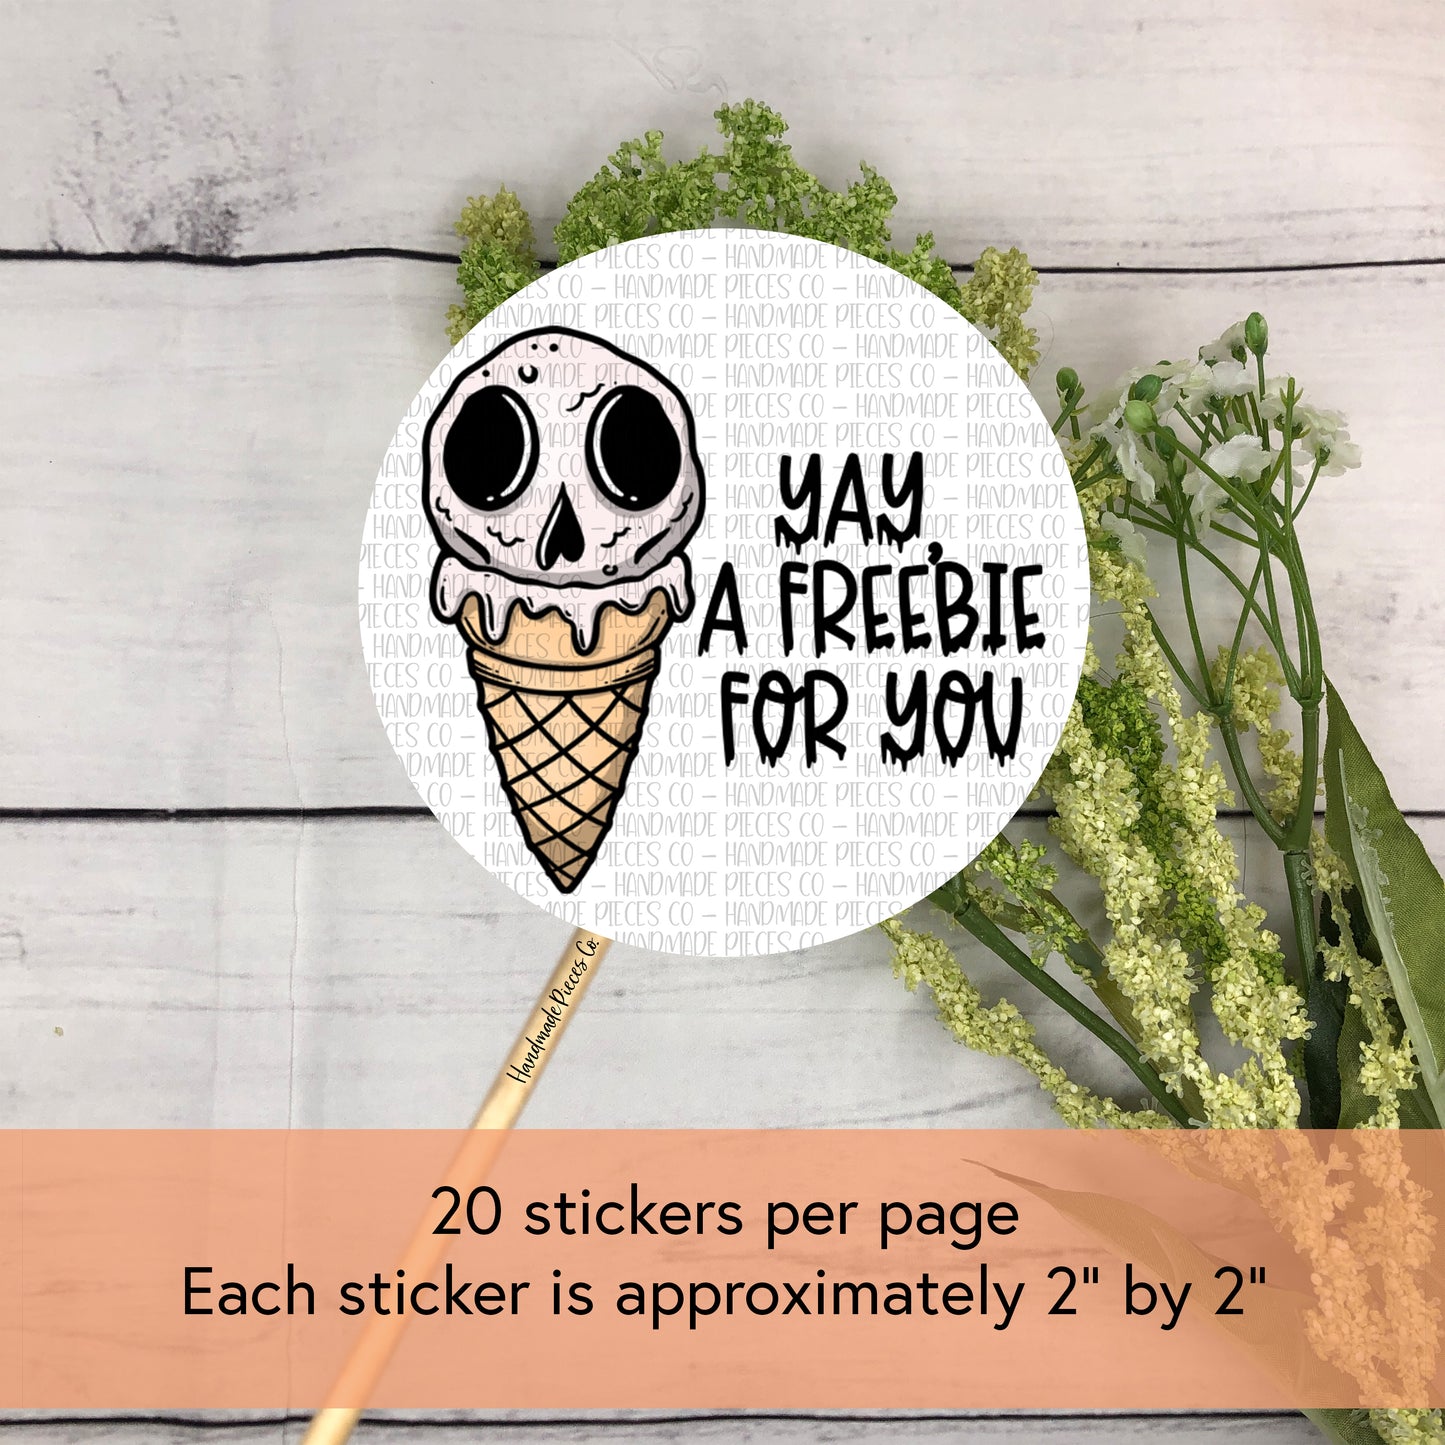 Yay, A Freebie for You - Packaging Sticker, Spooky Ghoul Summer Theme